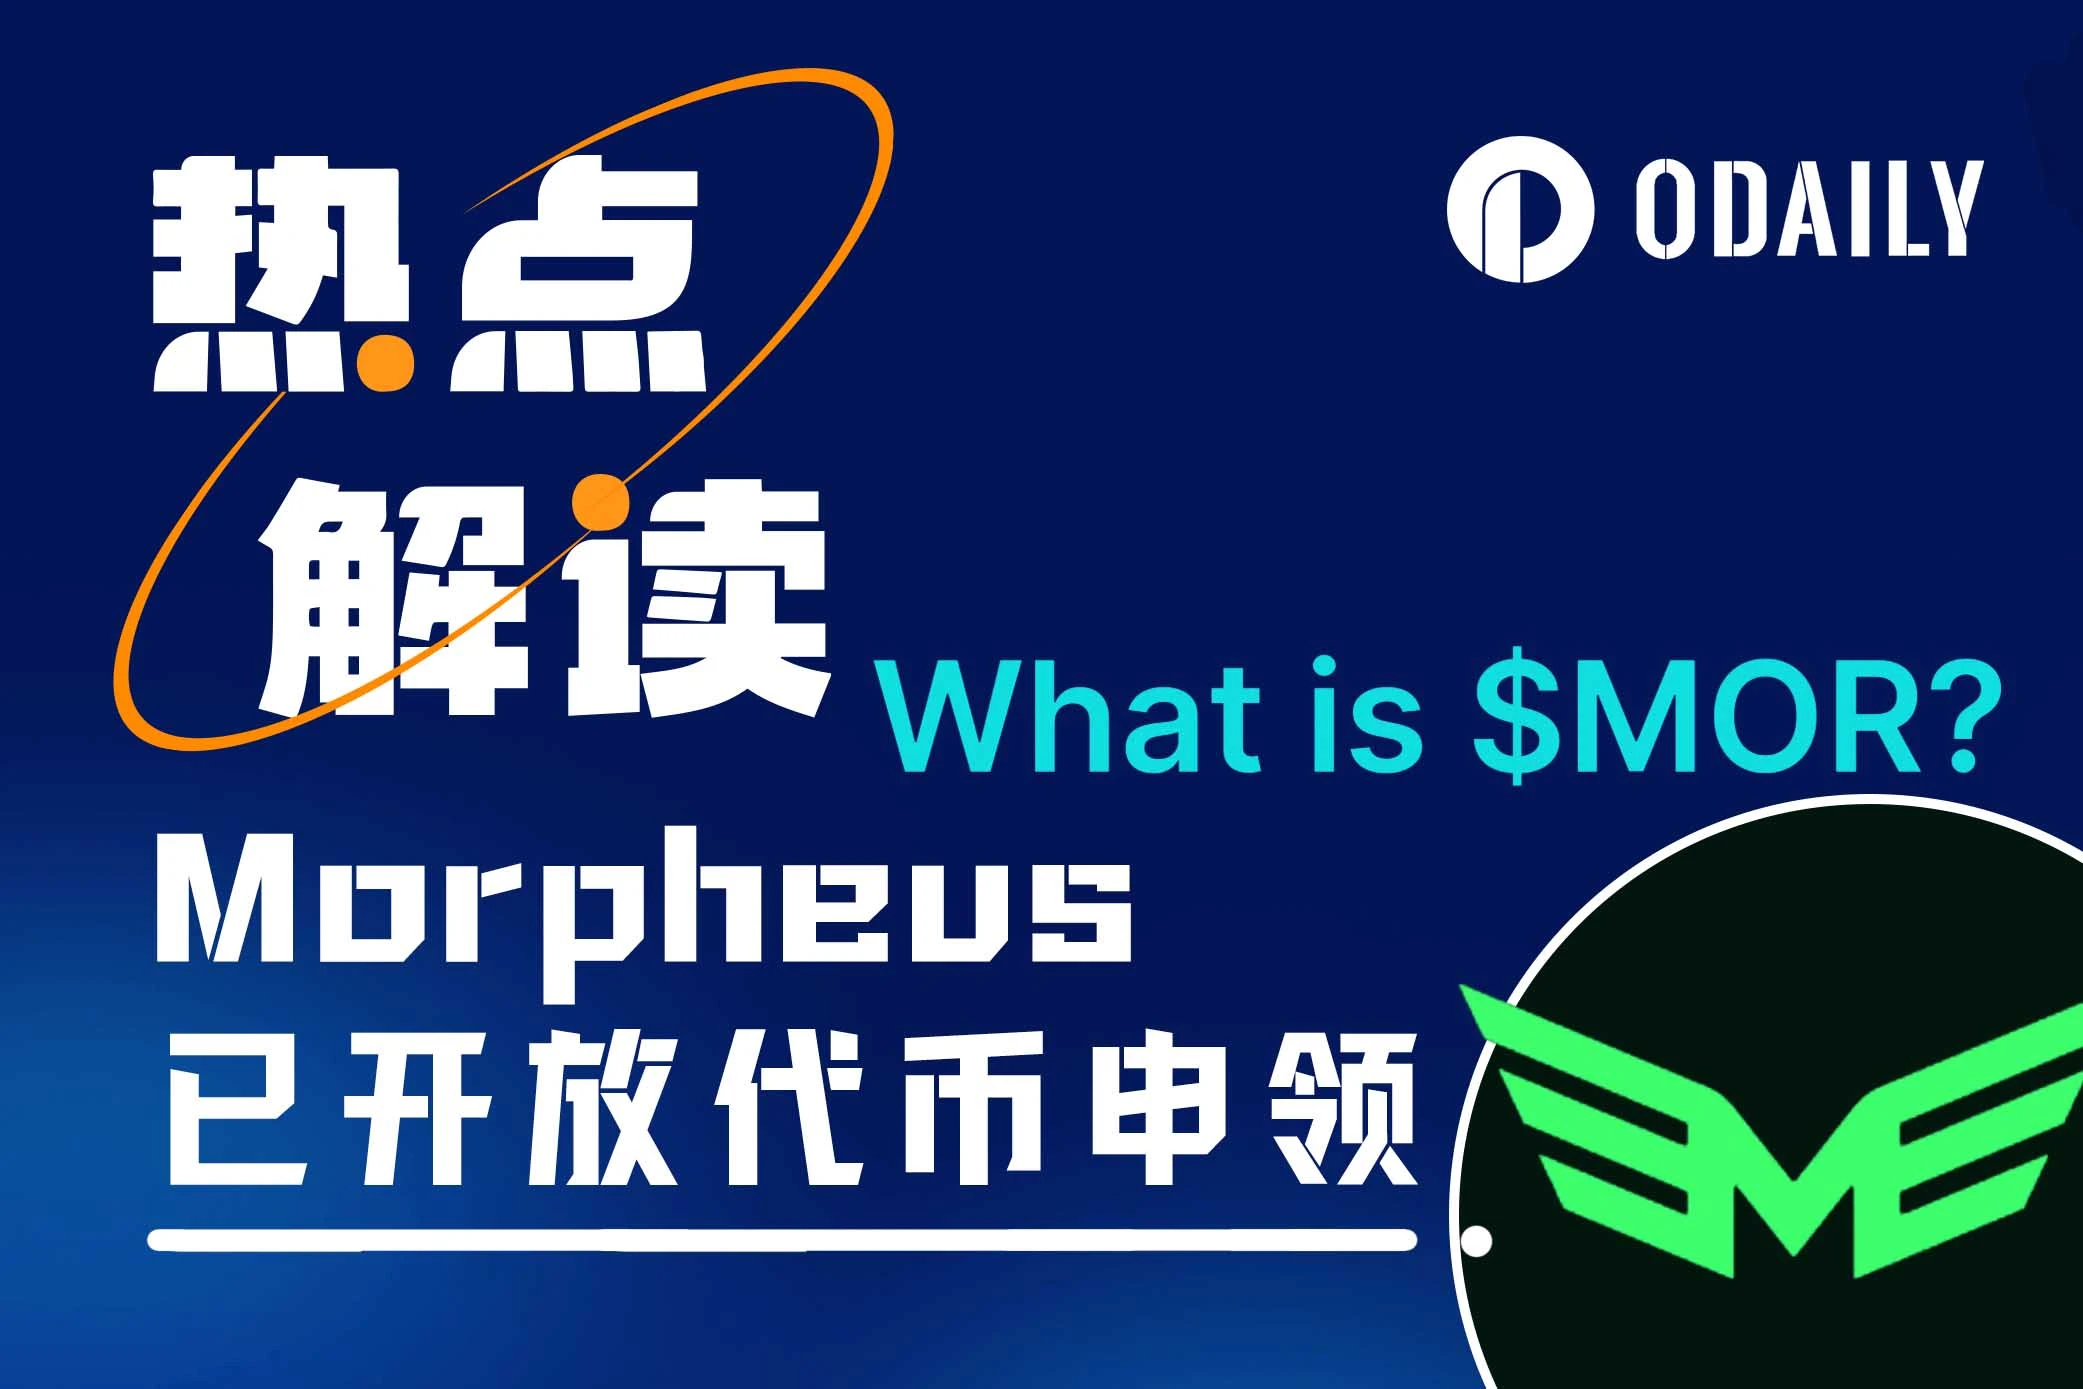 With over 100,000 ETH staked, can Morpheus become a leader in the AI field?